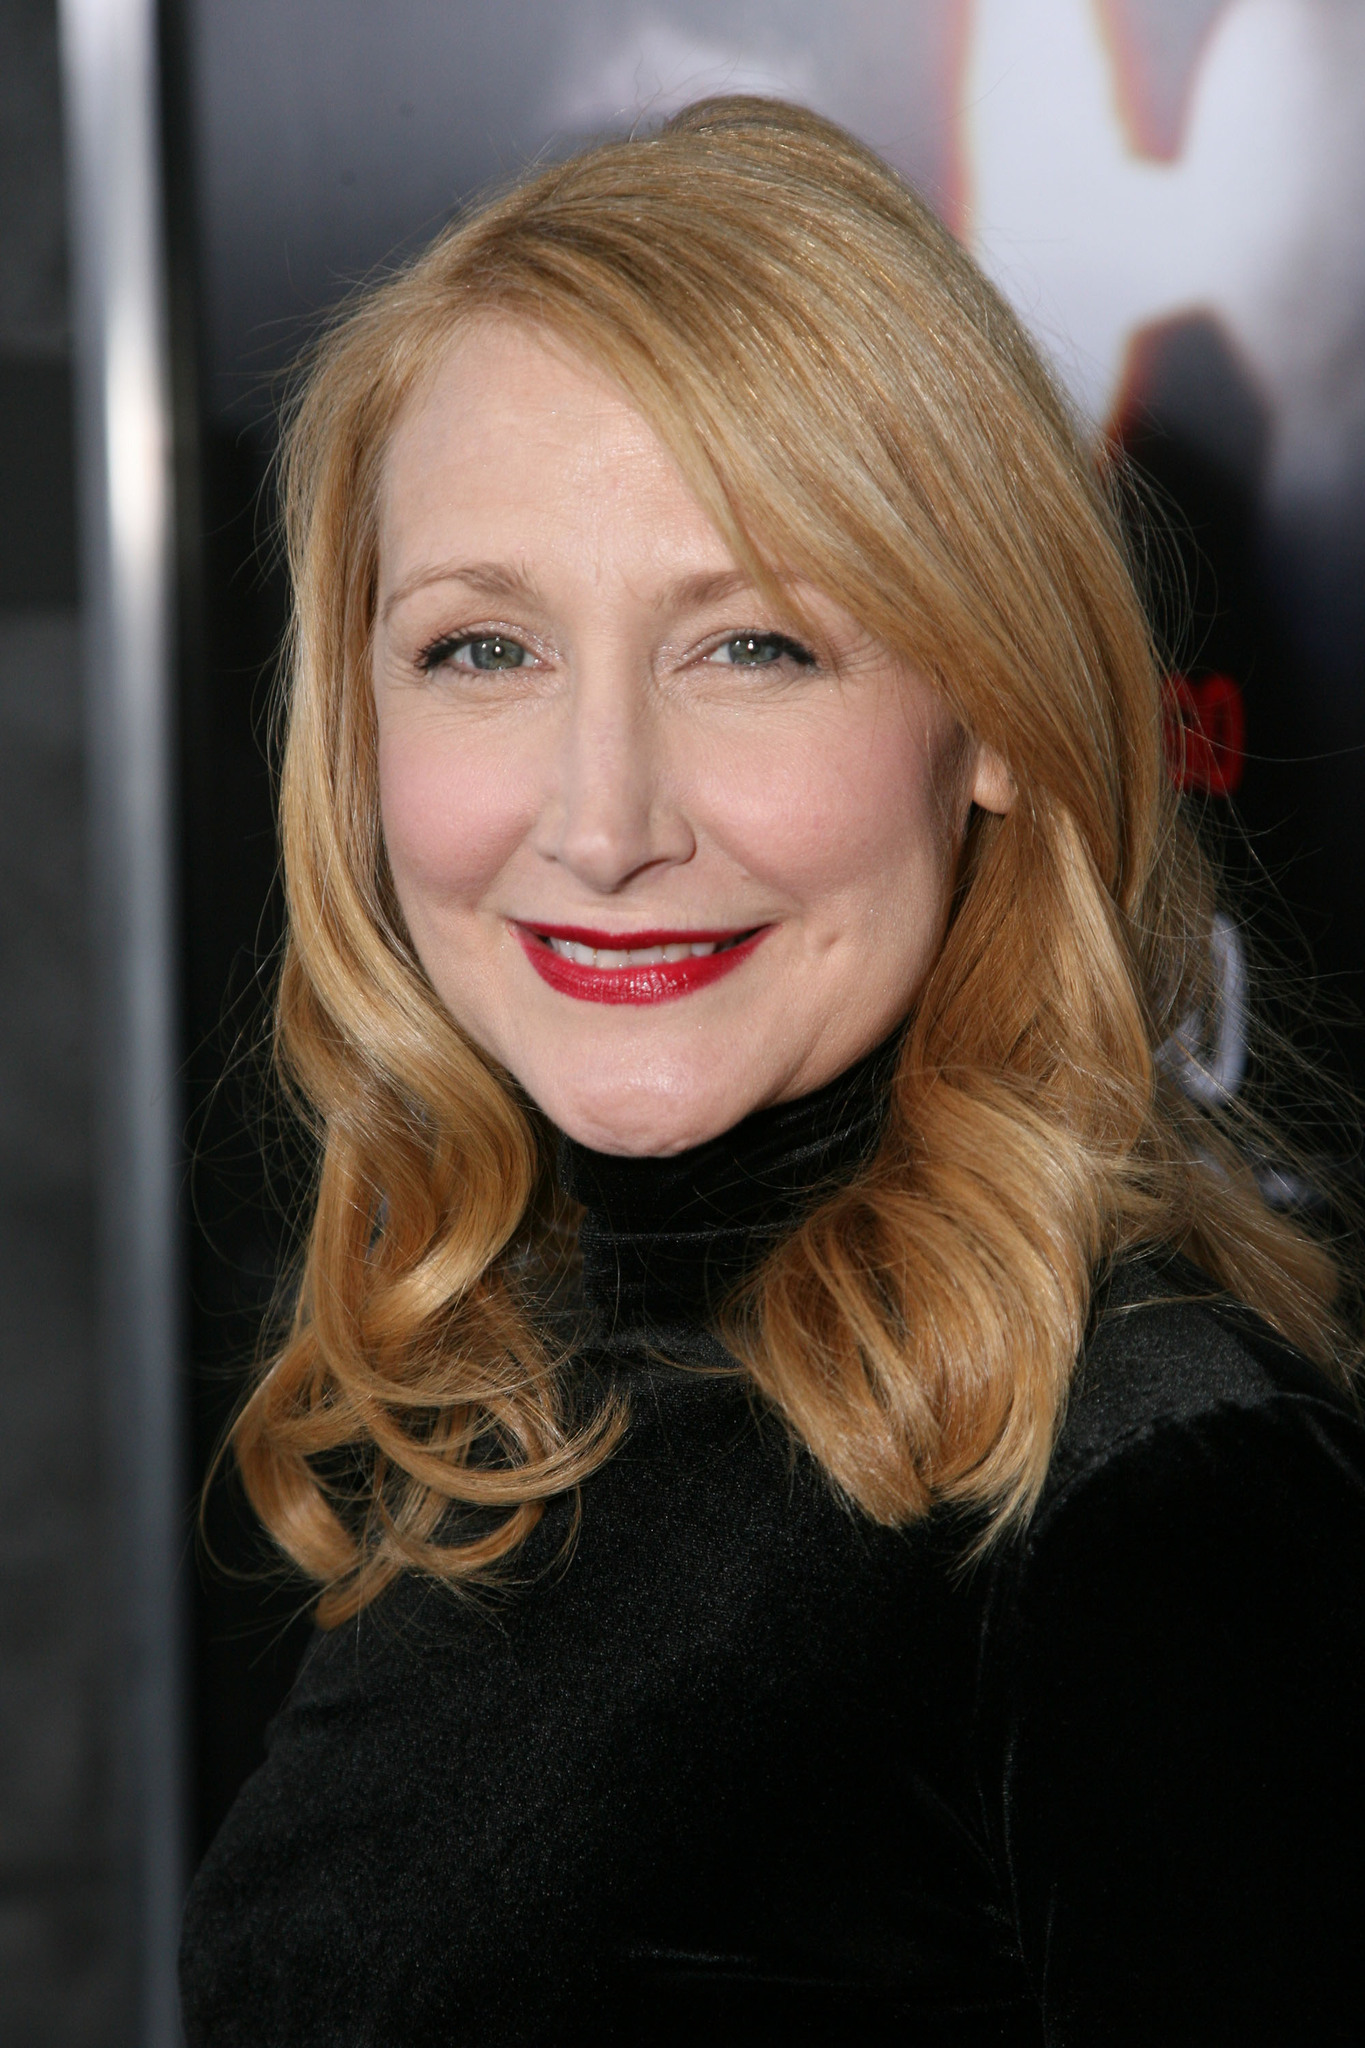 How tall is Patricia Clarkson?